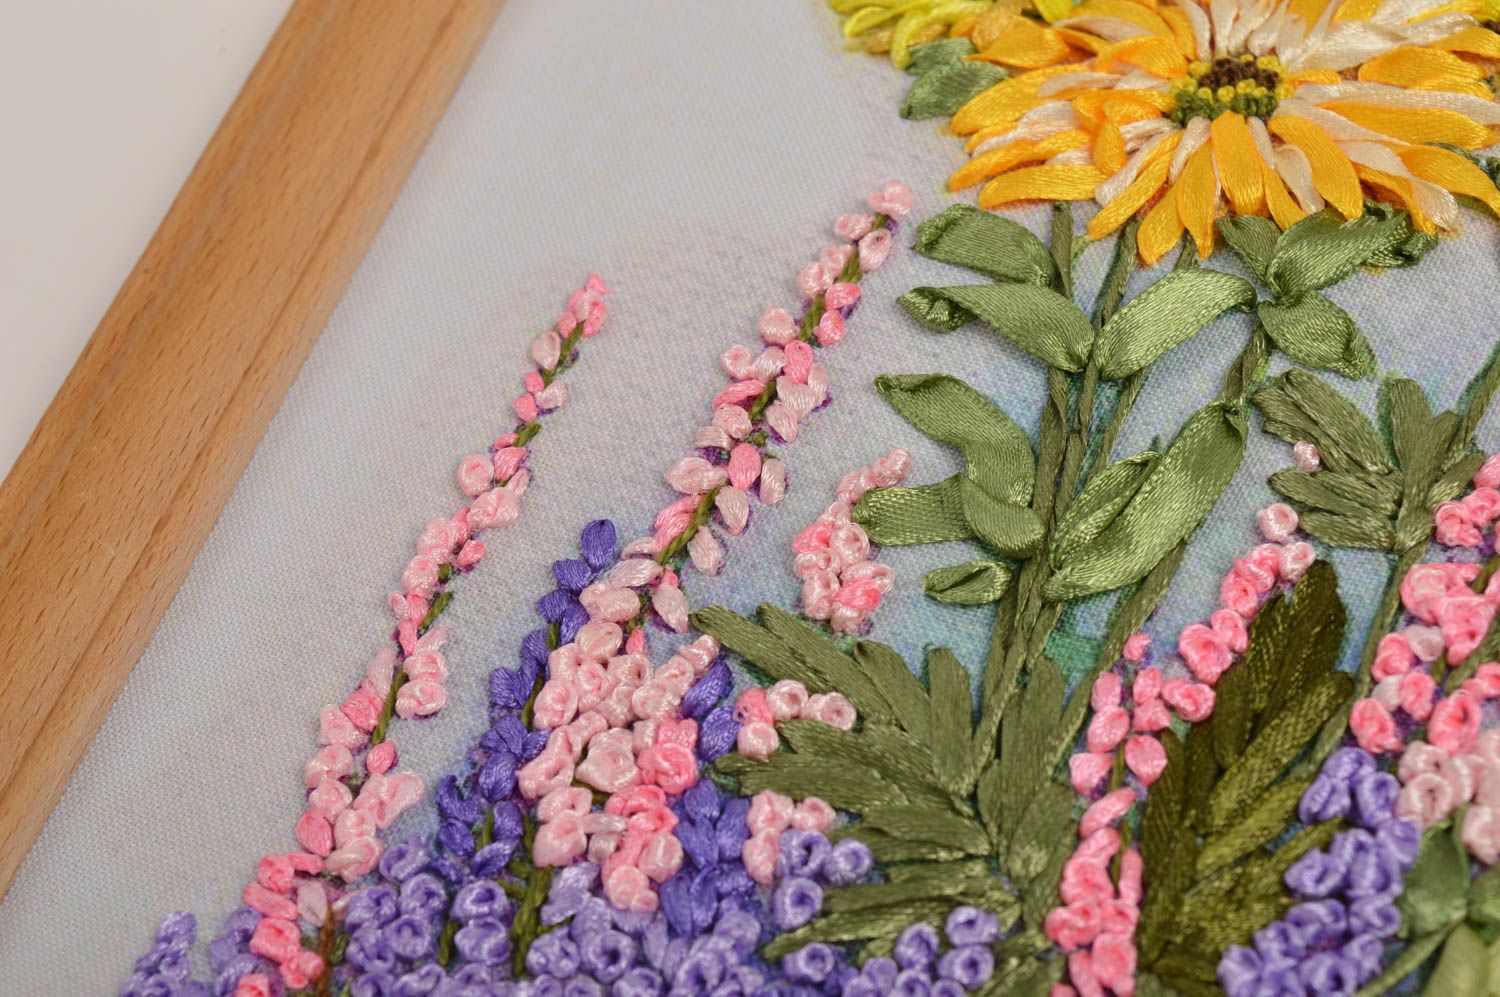 Handmade cute flower painting textile embroidered painting wall decor picture photo 3